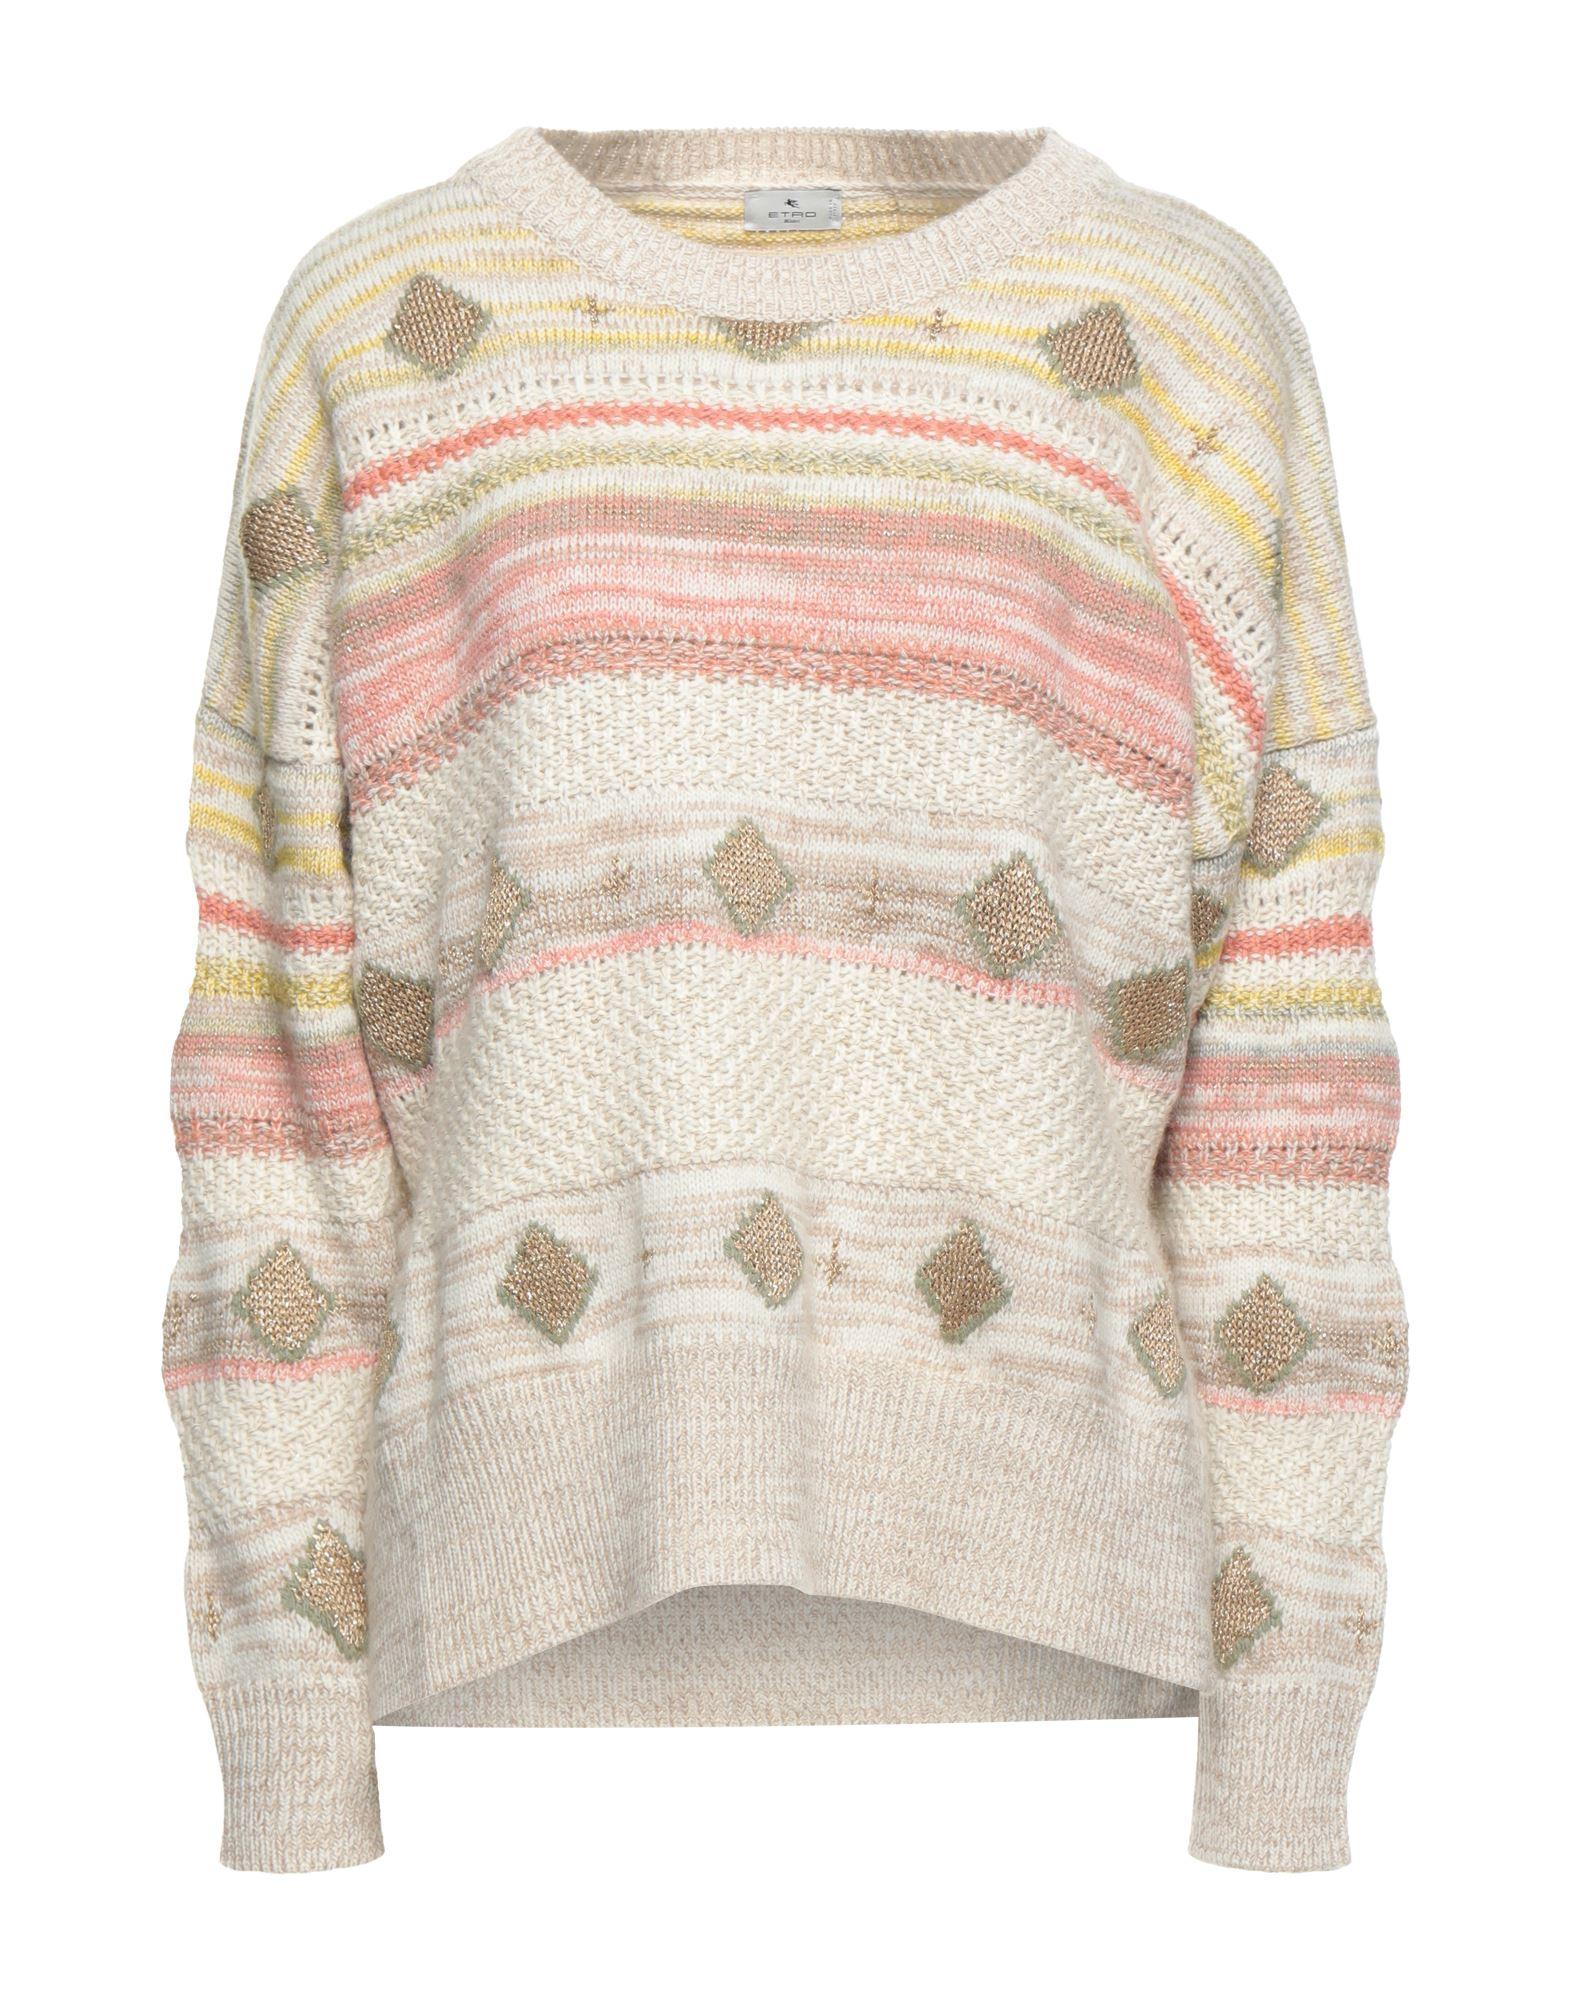 Natural Etro Wool And Cashmere-blend Sweater in White Womens Jumpers and knitwear Etro Jumpers and knitwear 